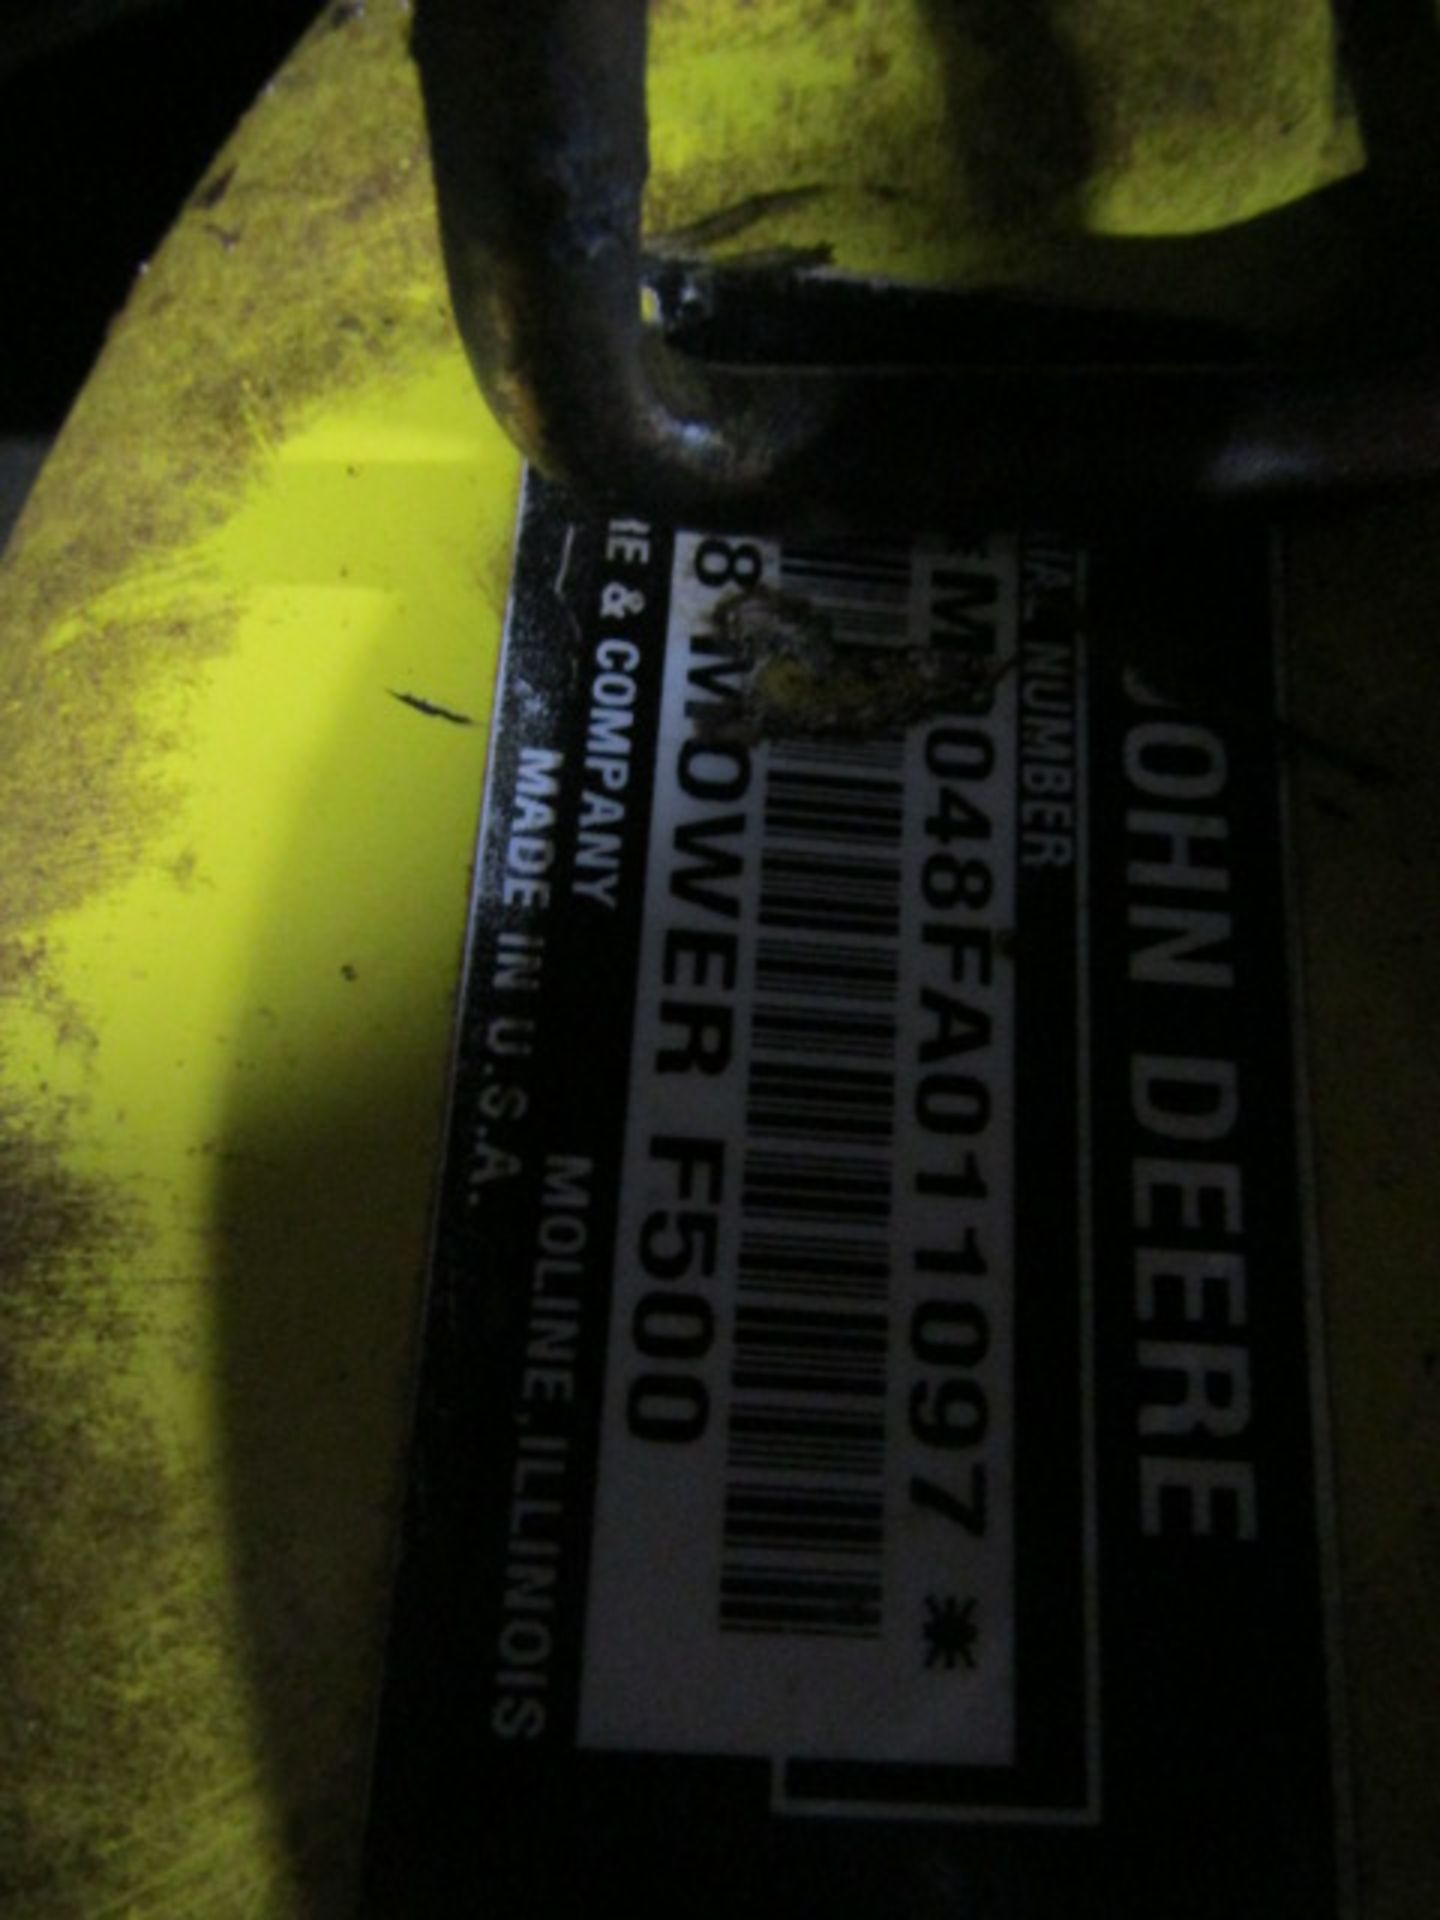 JD Mower F525, 561 hours, Serial #MOF525A151069 - Image 7 of 7